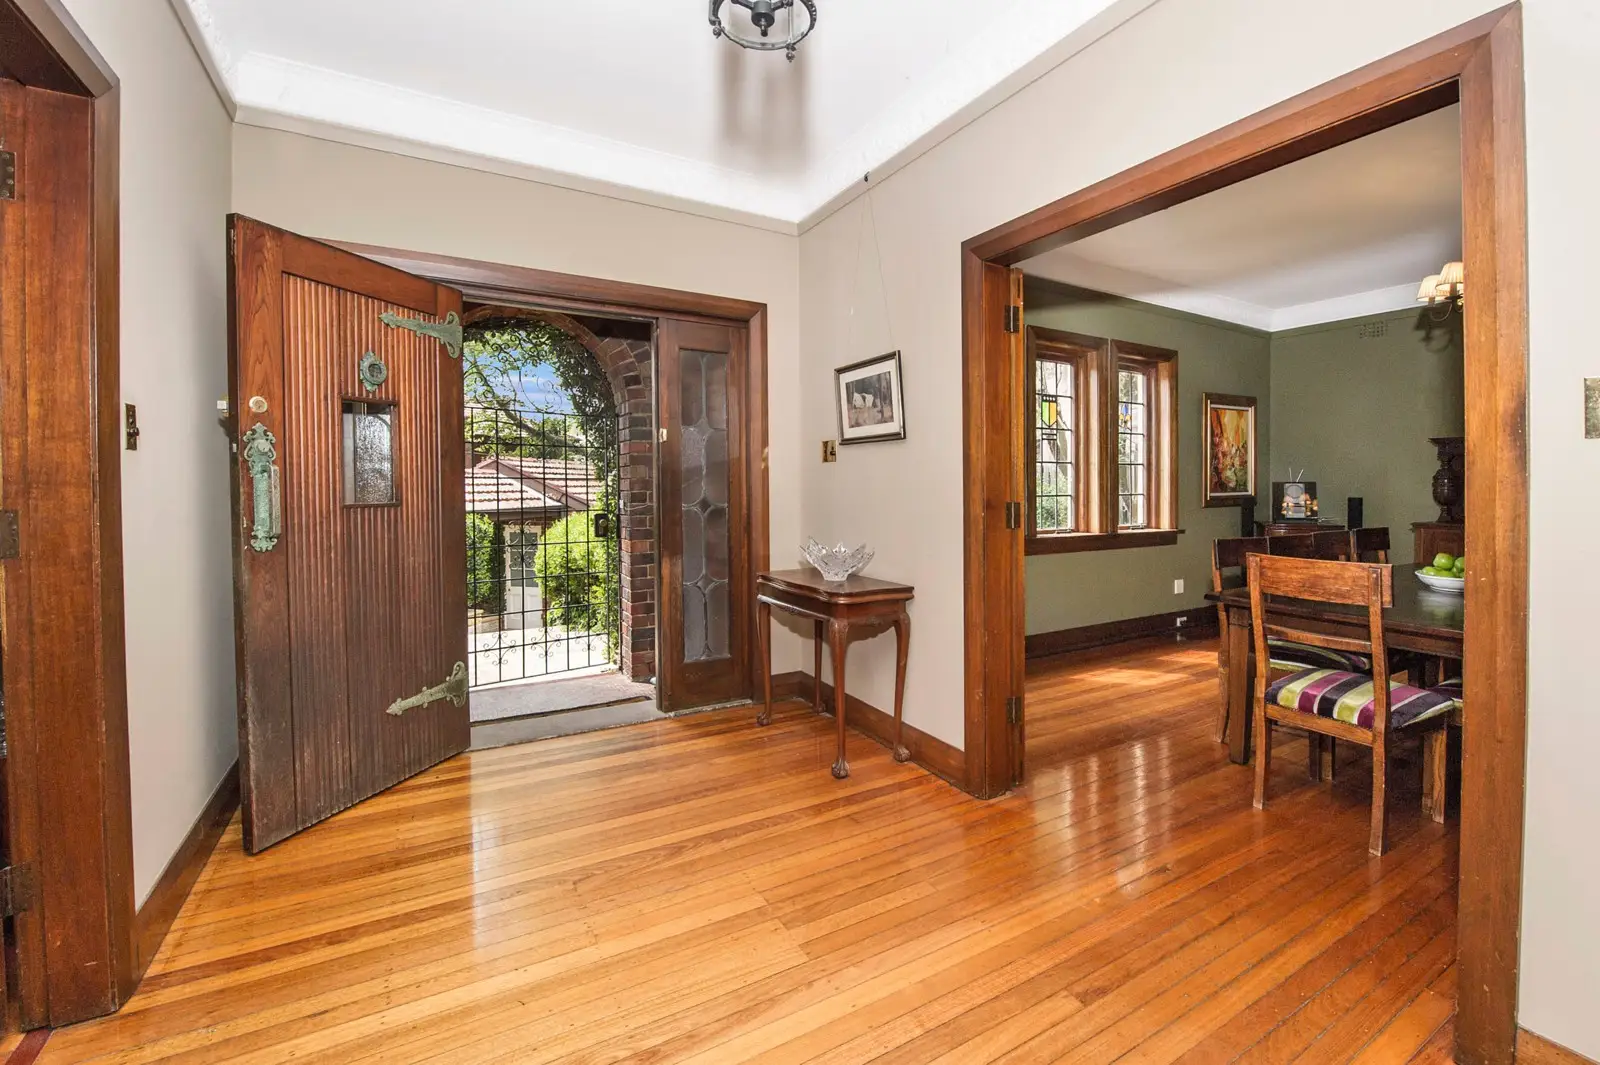 Photo #3: 8 Glencoe Road, Woollahra - Sold by Sydney Sotheby's International Realty